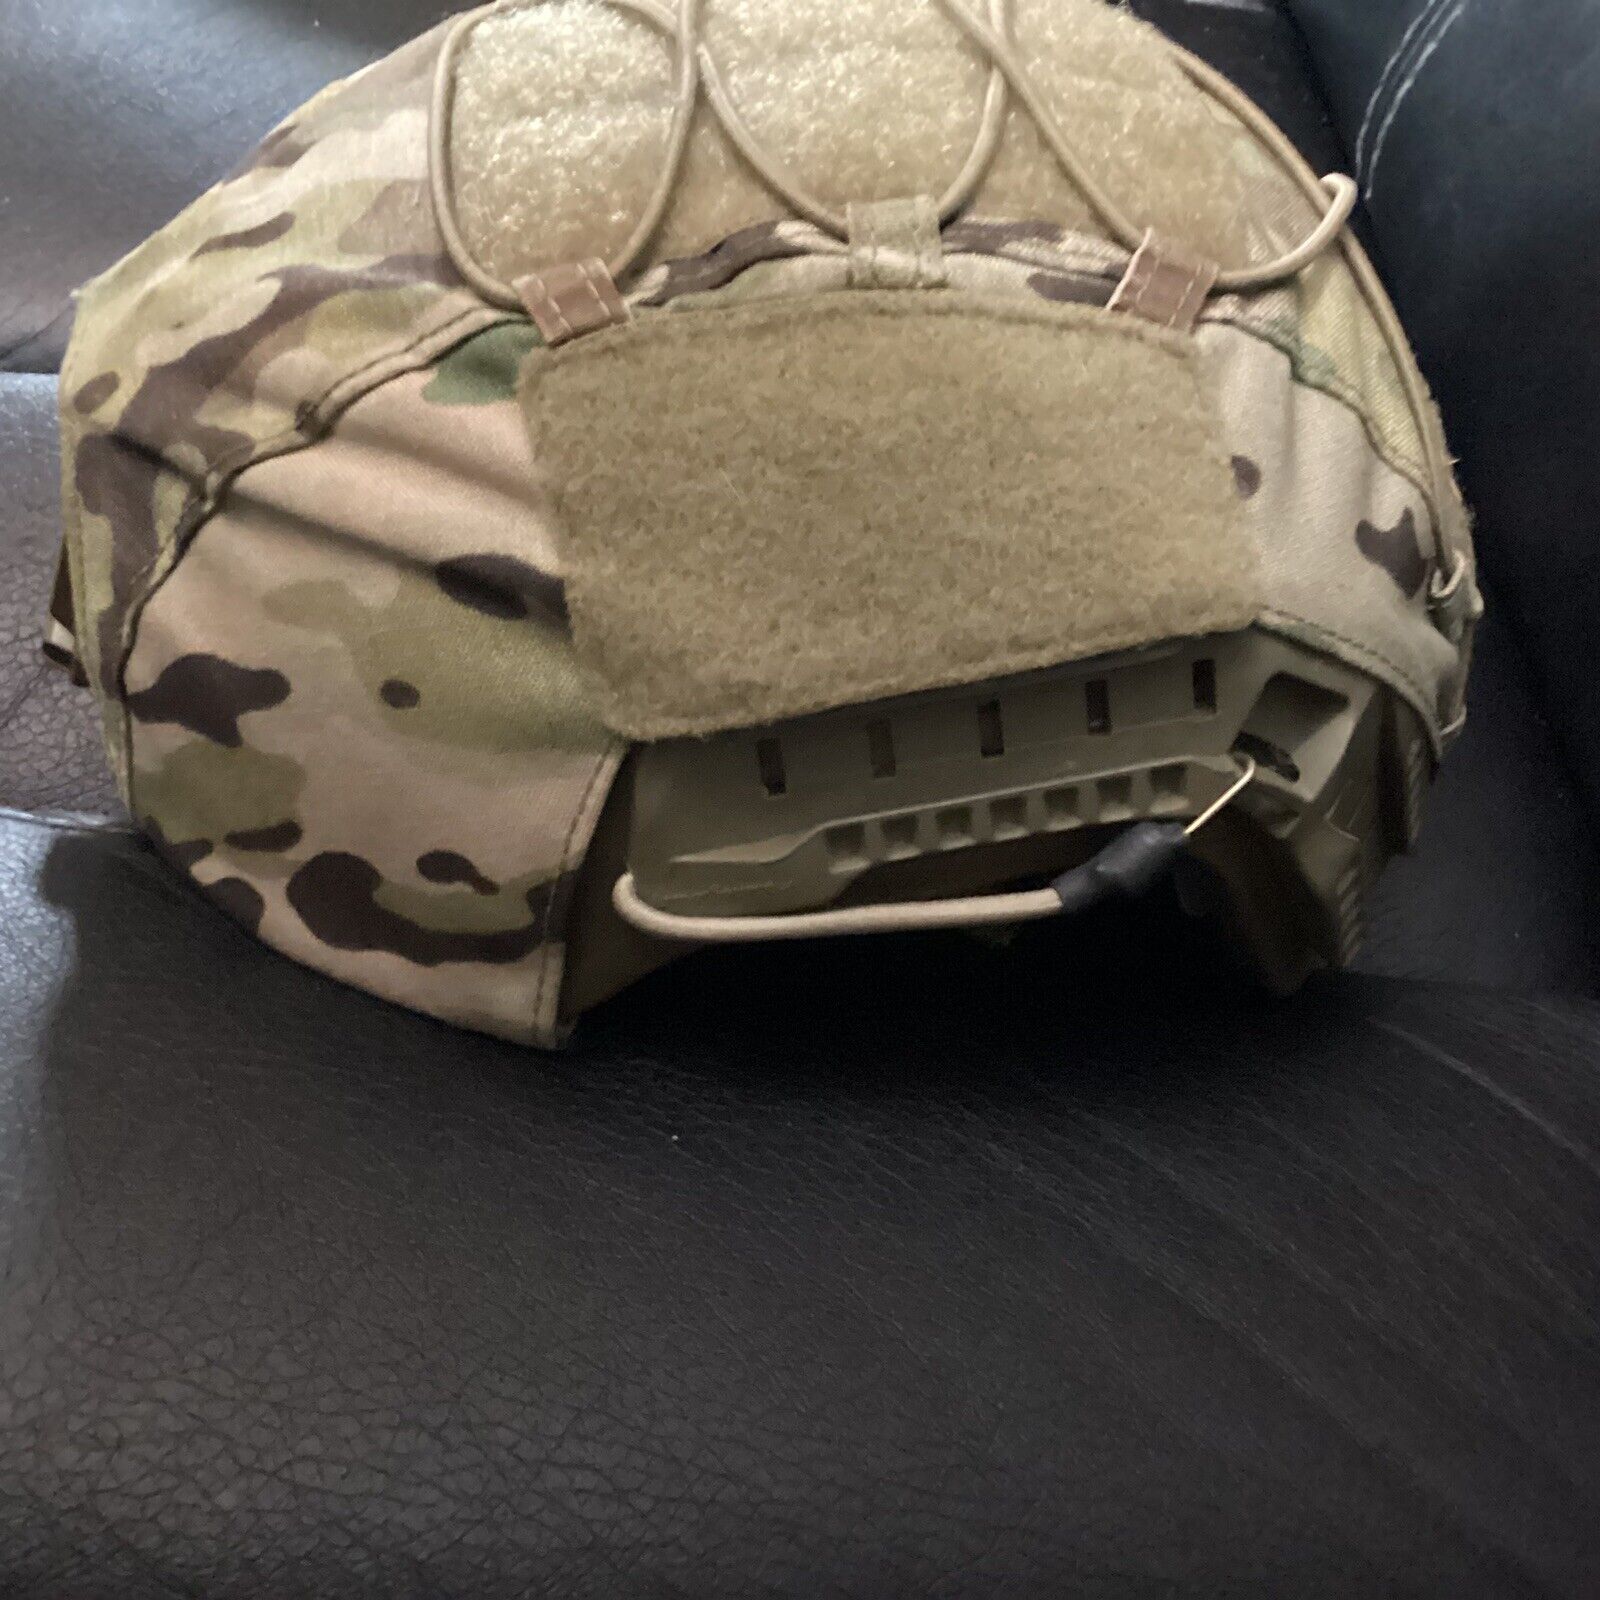 ArmourSource LJD Sniper Size 1 Helmet